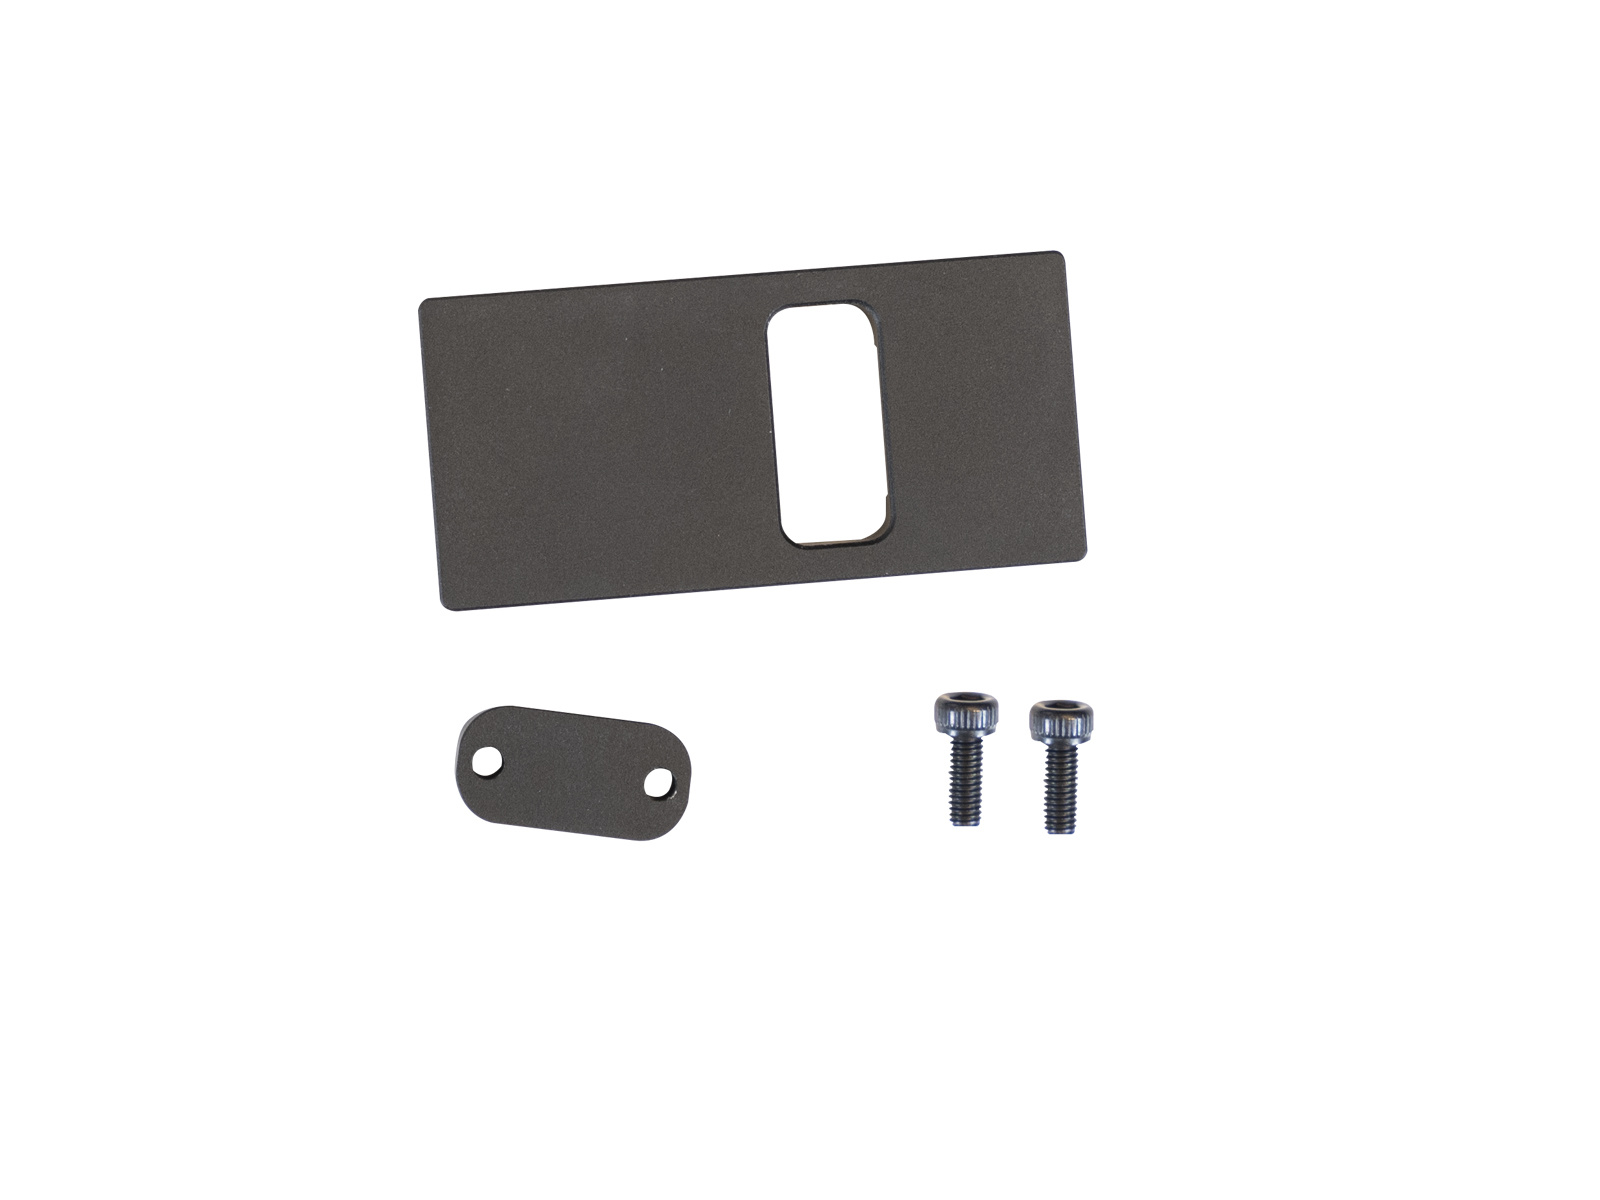 ASG Adapter plate RMR Mount for CZ Shadow 2